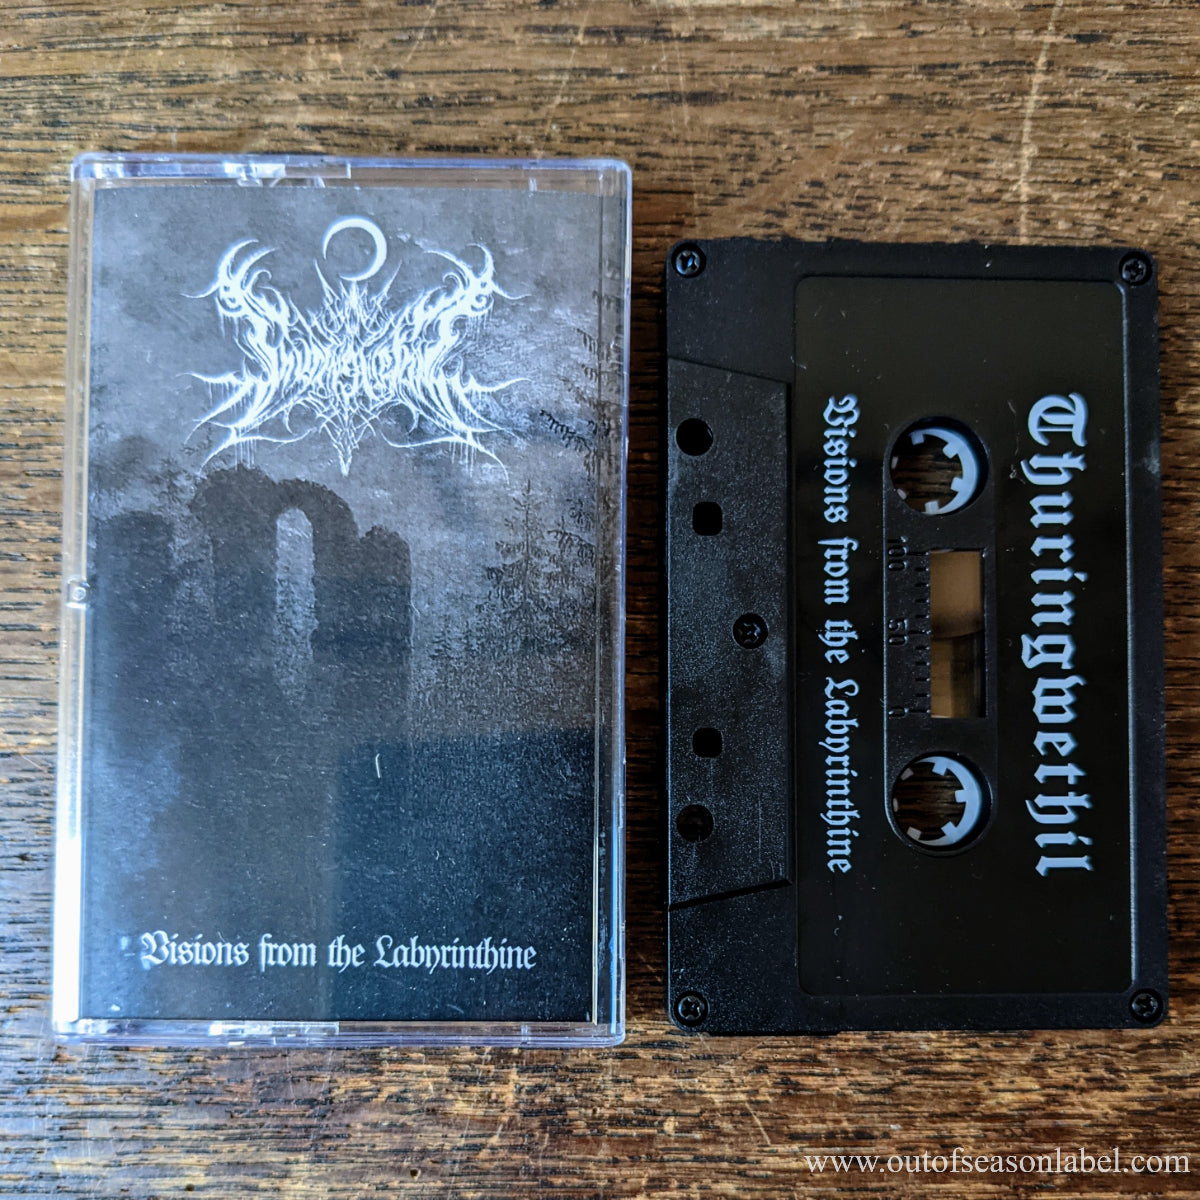 [SOLD OUT] THURINGWETHIL "Visions From The Labyrinthine" Cassette Tape (Lim. 100)